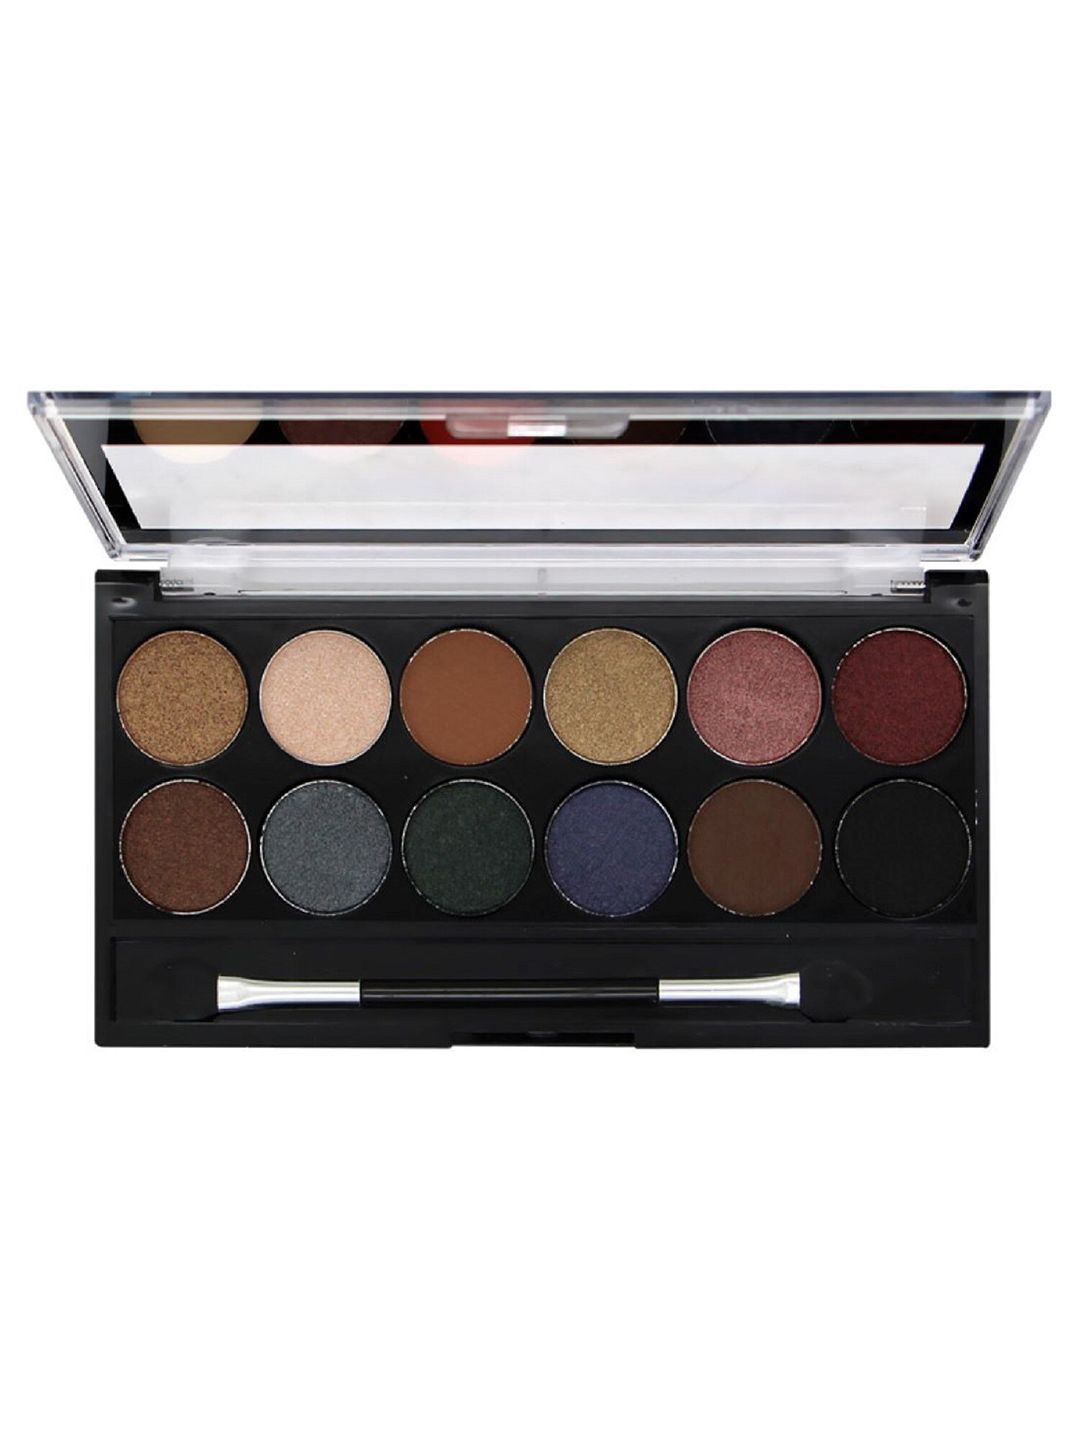 Fashion Colour Jersy Girl Artist Makeup 12 Colour Eyeshadow Palette - Shade 02 Price in India